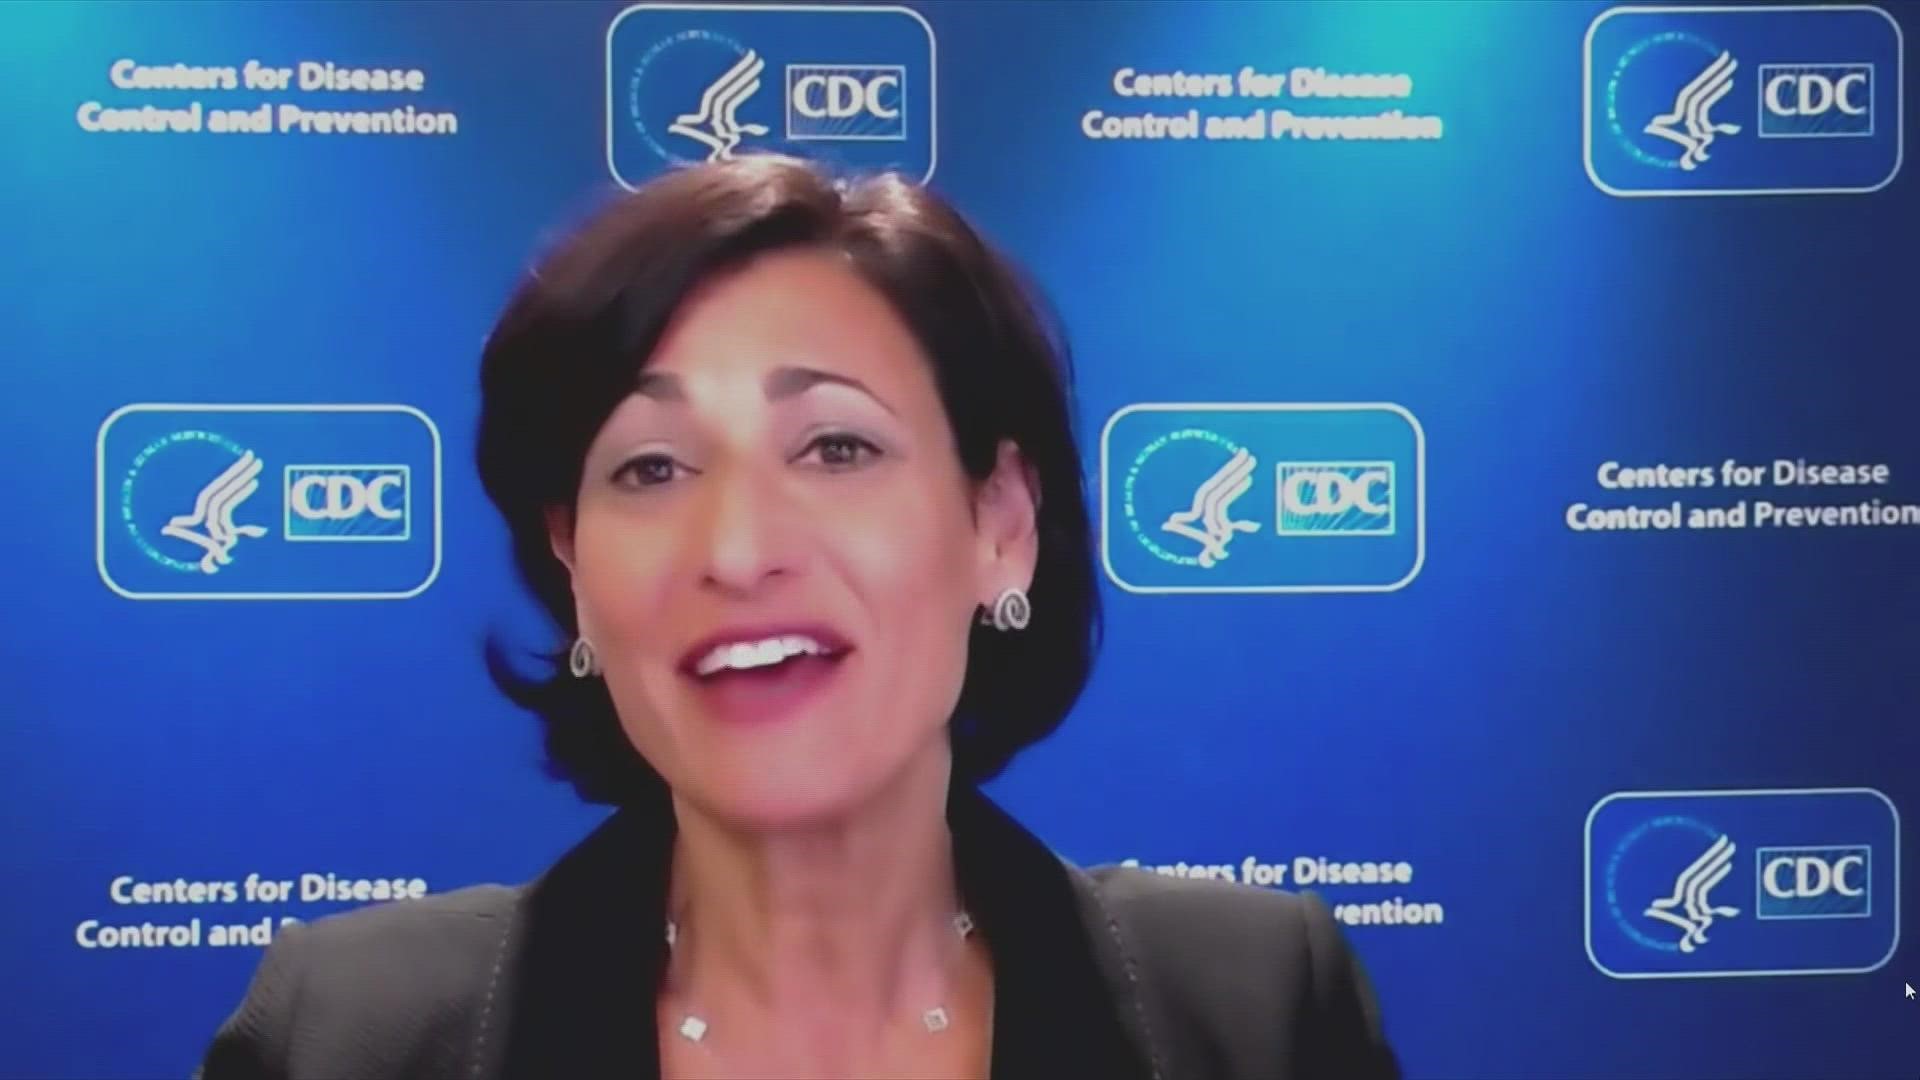 Dr. Rochelle Walensky, Director of the Centers for Disease Control and Prevention, addresses the importance of being vaccinated and the perks of offering boosters.